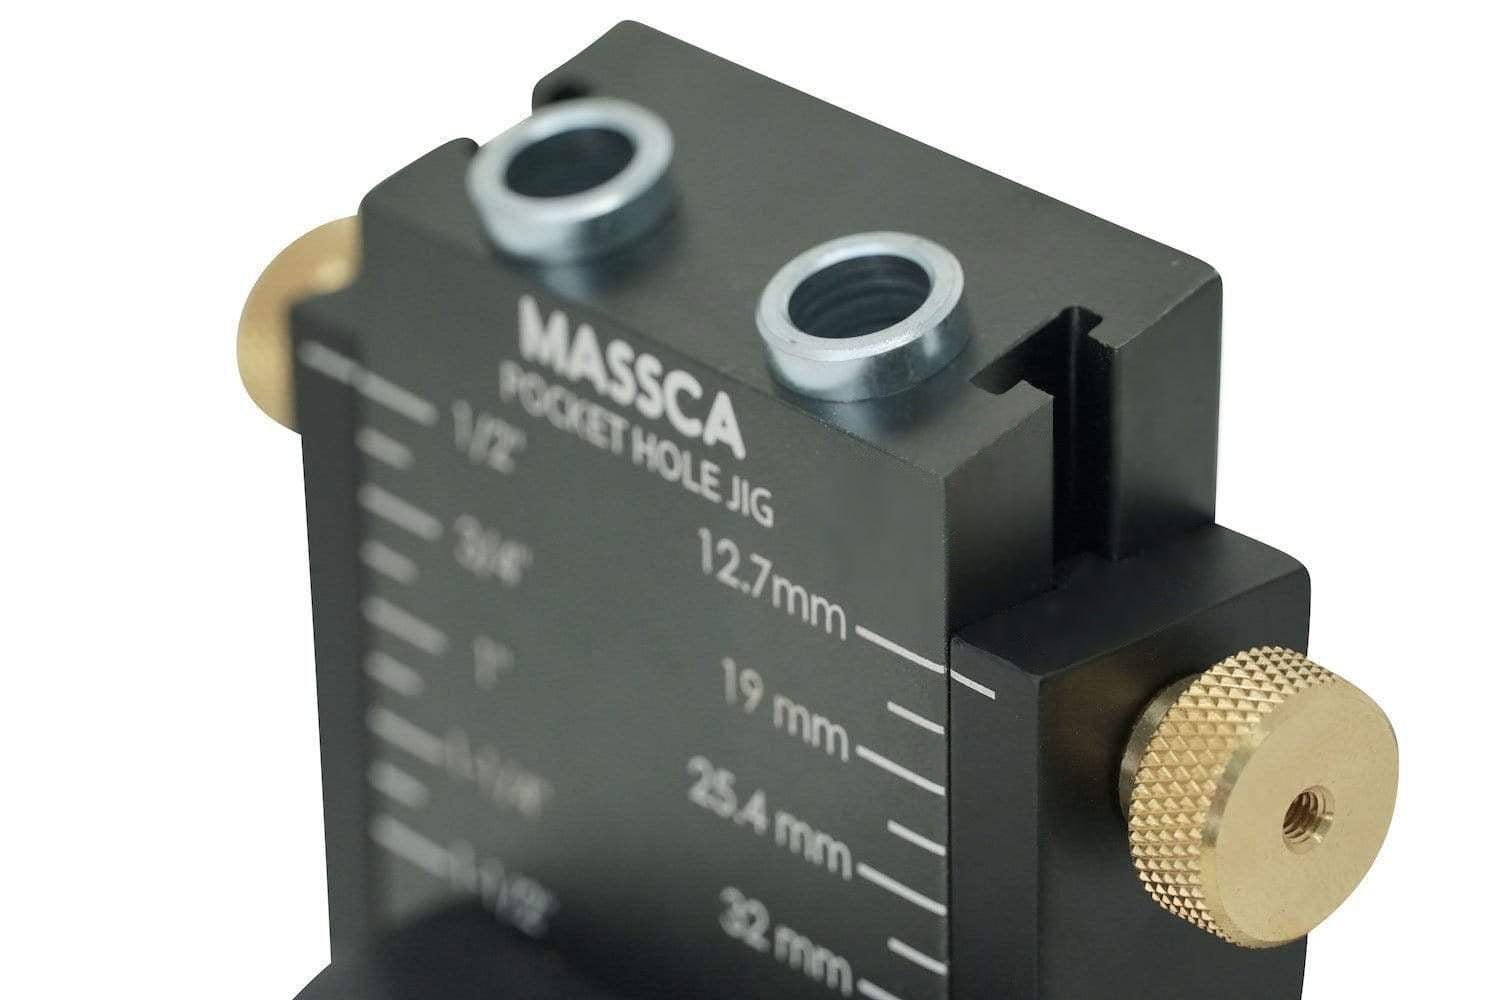 Massca Twin Pocket Hole Jig Kit X0023NLS7H from Massca - Acme Tools